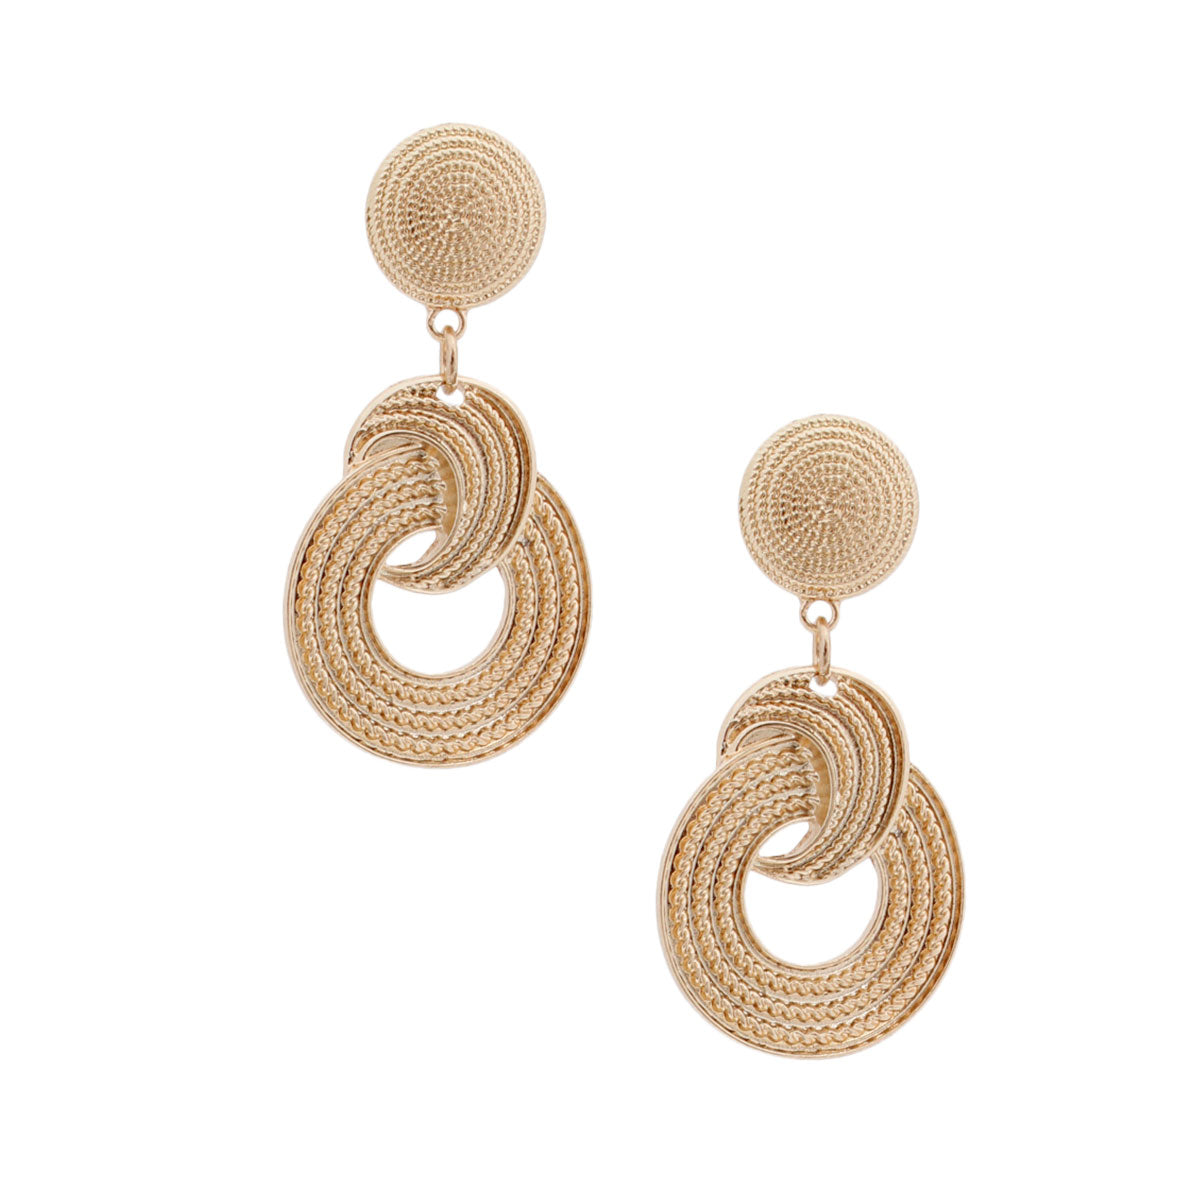 Gold Patterned Circle Earrings